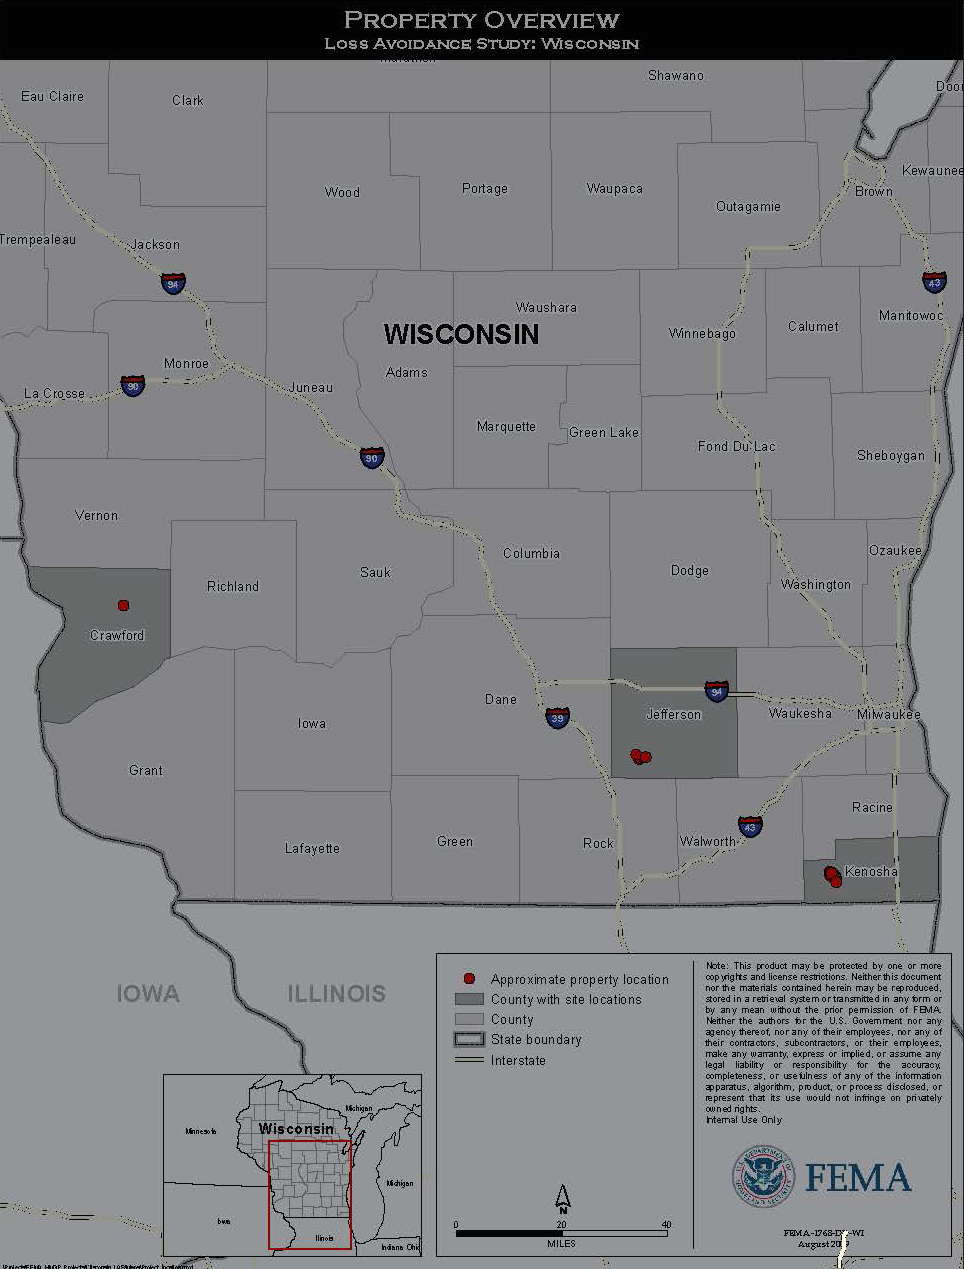 Map of Wisconsin showing approximate property location, county with site locations, county, state boundary interstate.